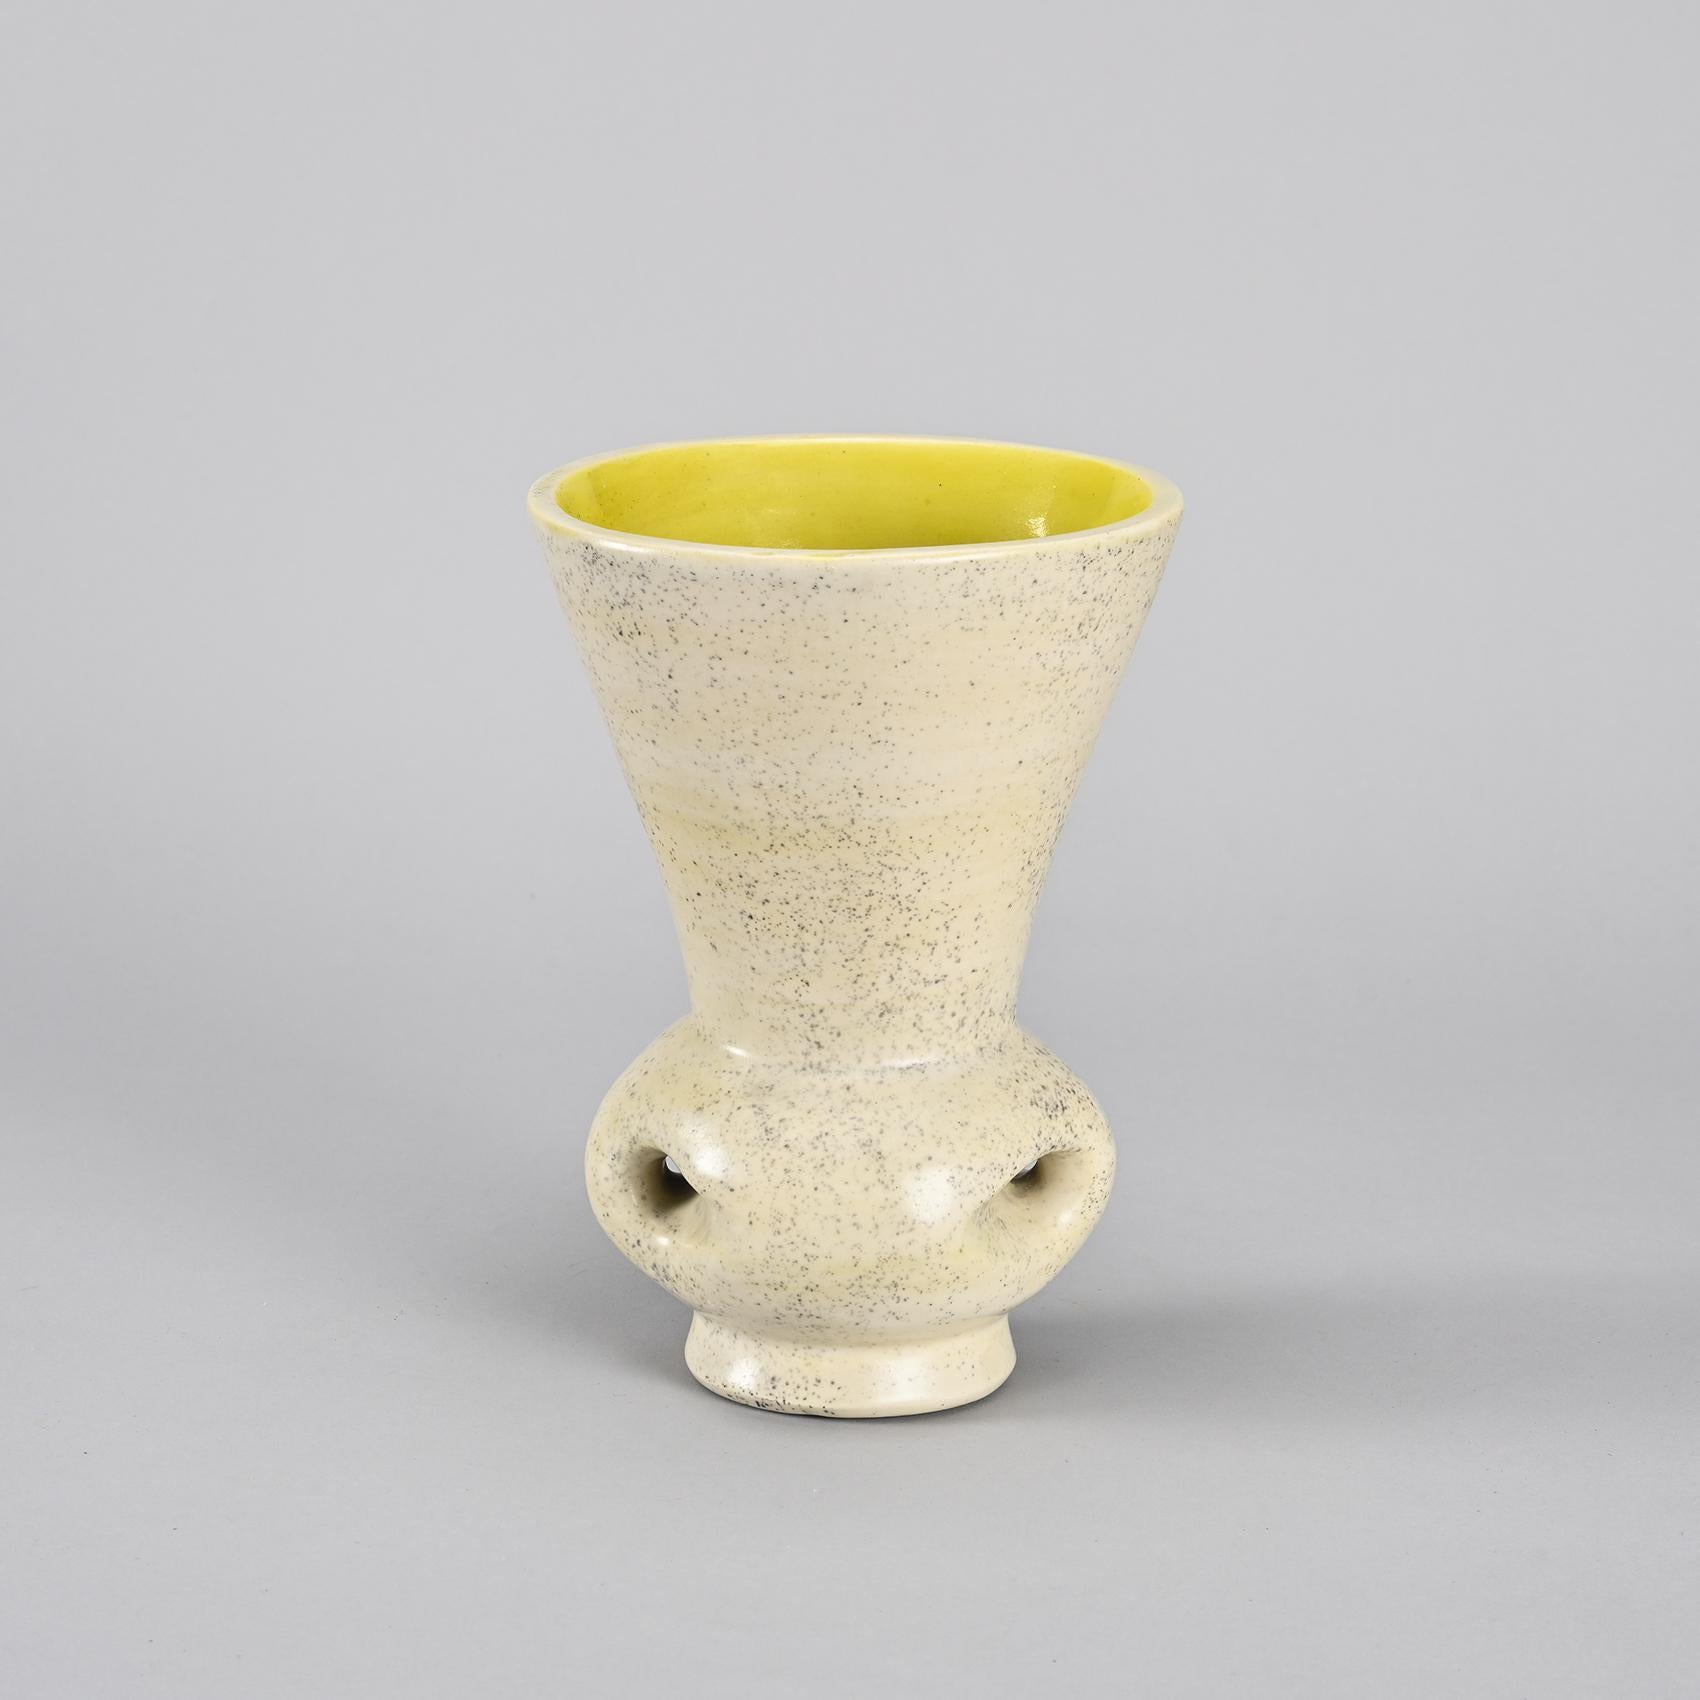 A pretty vase with handles by Mado Jolain, a French ceramicist active from 1946 to 1970.
Completely made of white clay covered with a milky white glaze speckled with lemon yellow on the interior.
Circa 1950.
Marked on the back with the shape number